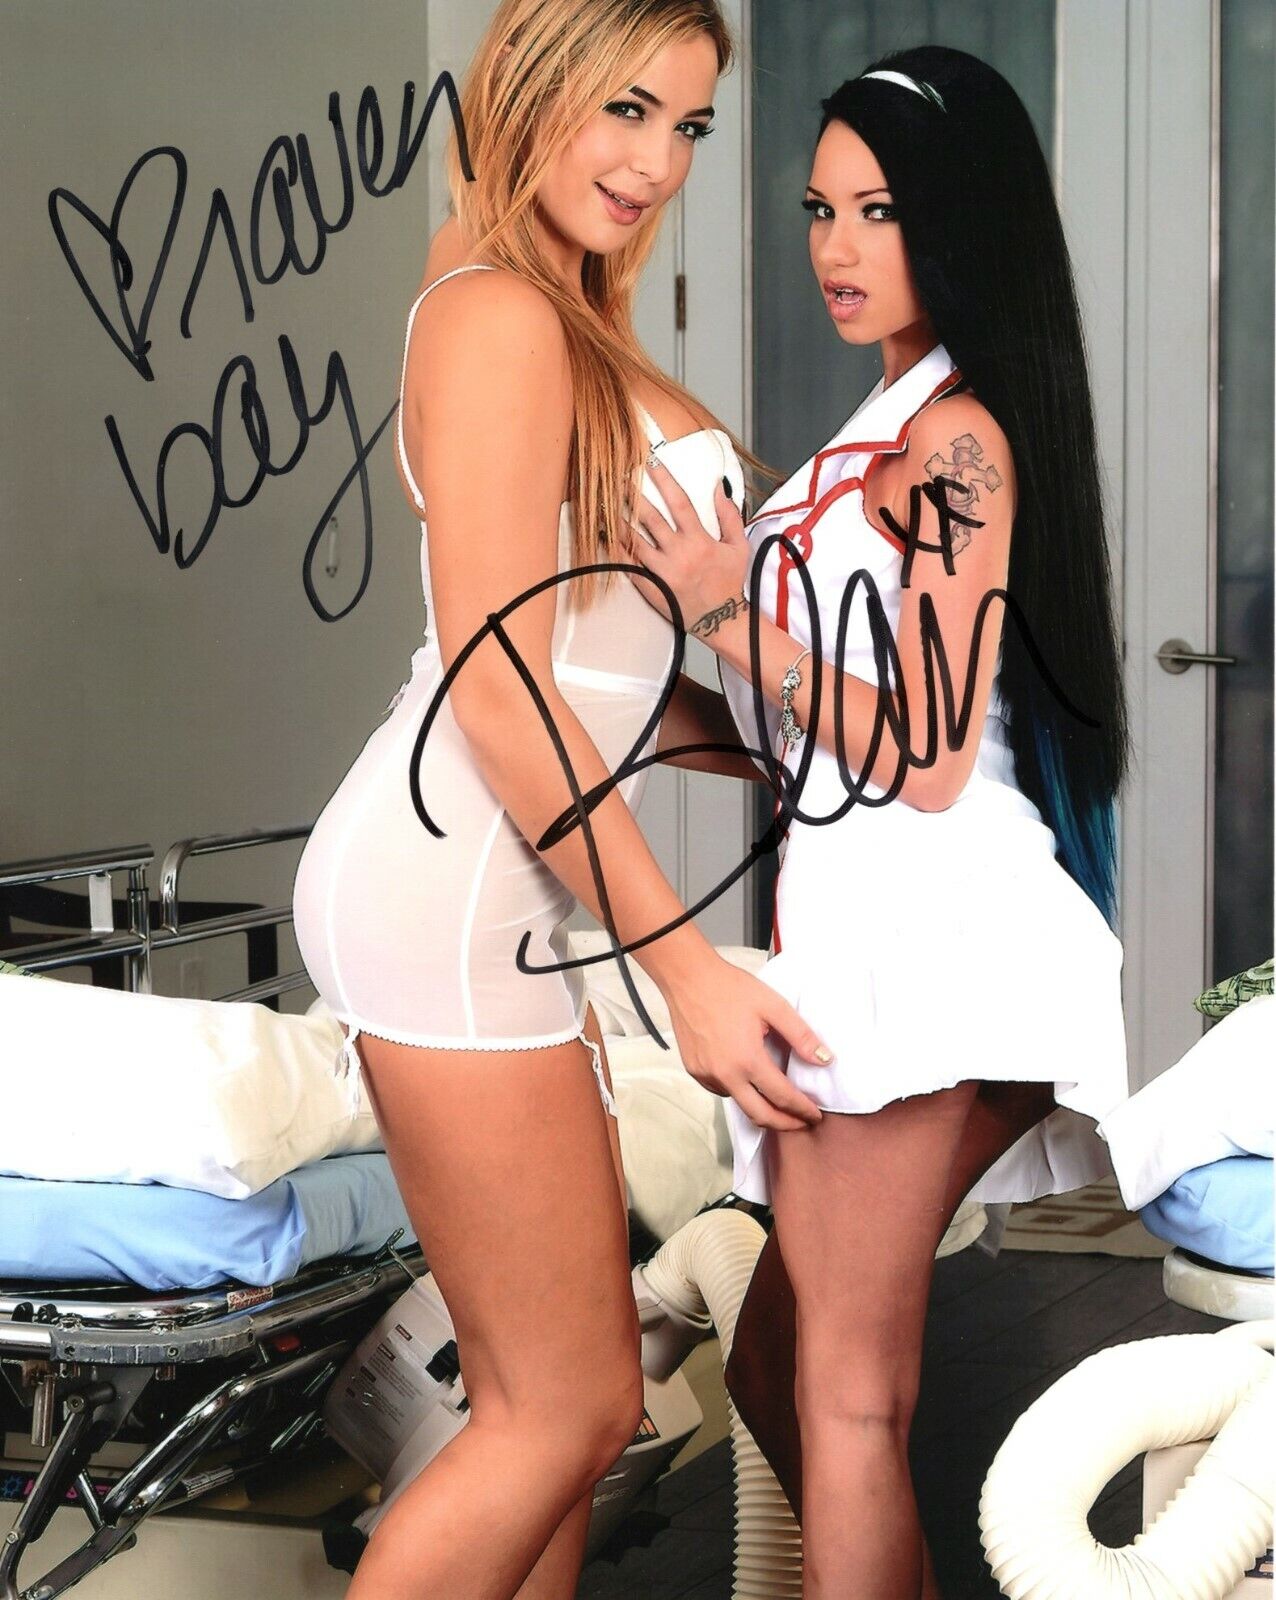 Raven Bay & Blair Williams Combo Signed 8x10 Photo Poster painting Adult Model COA Proof